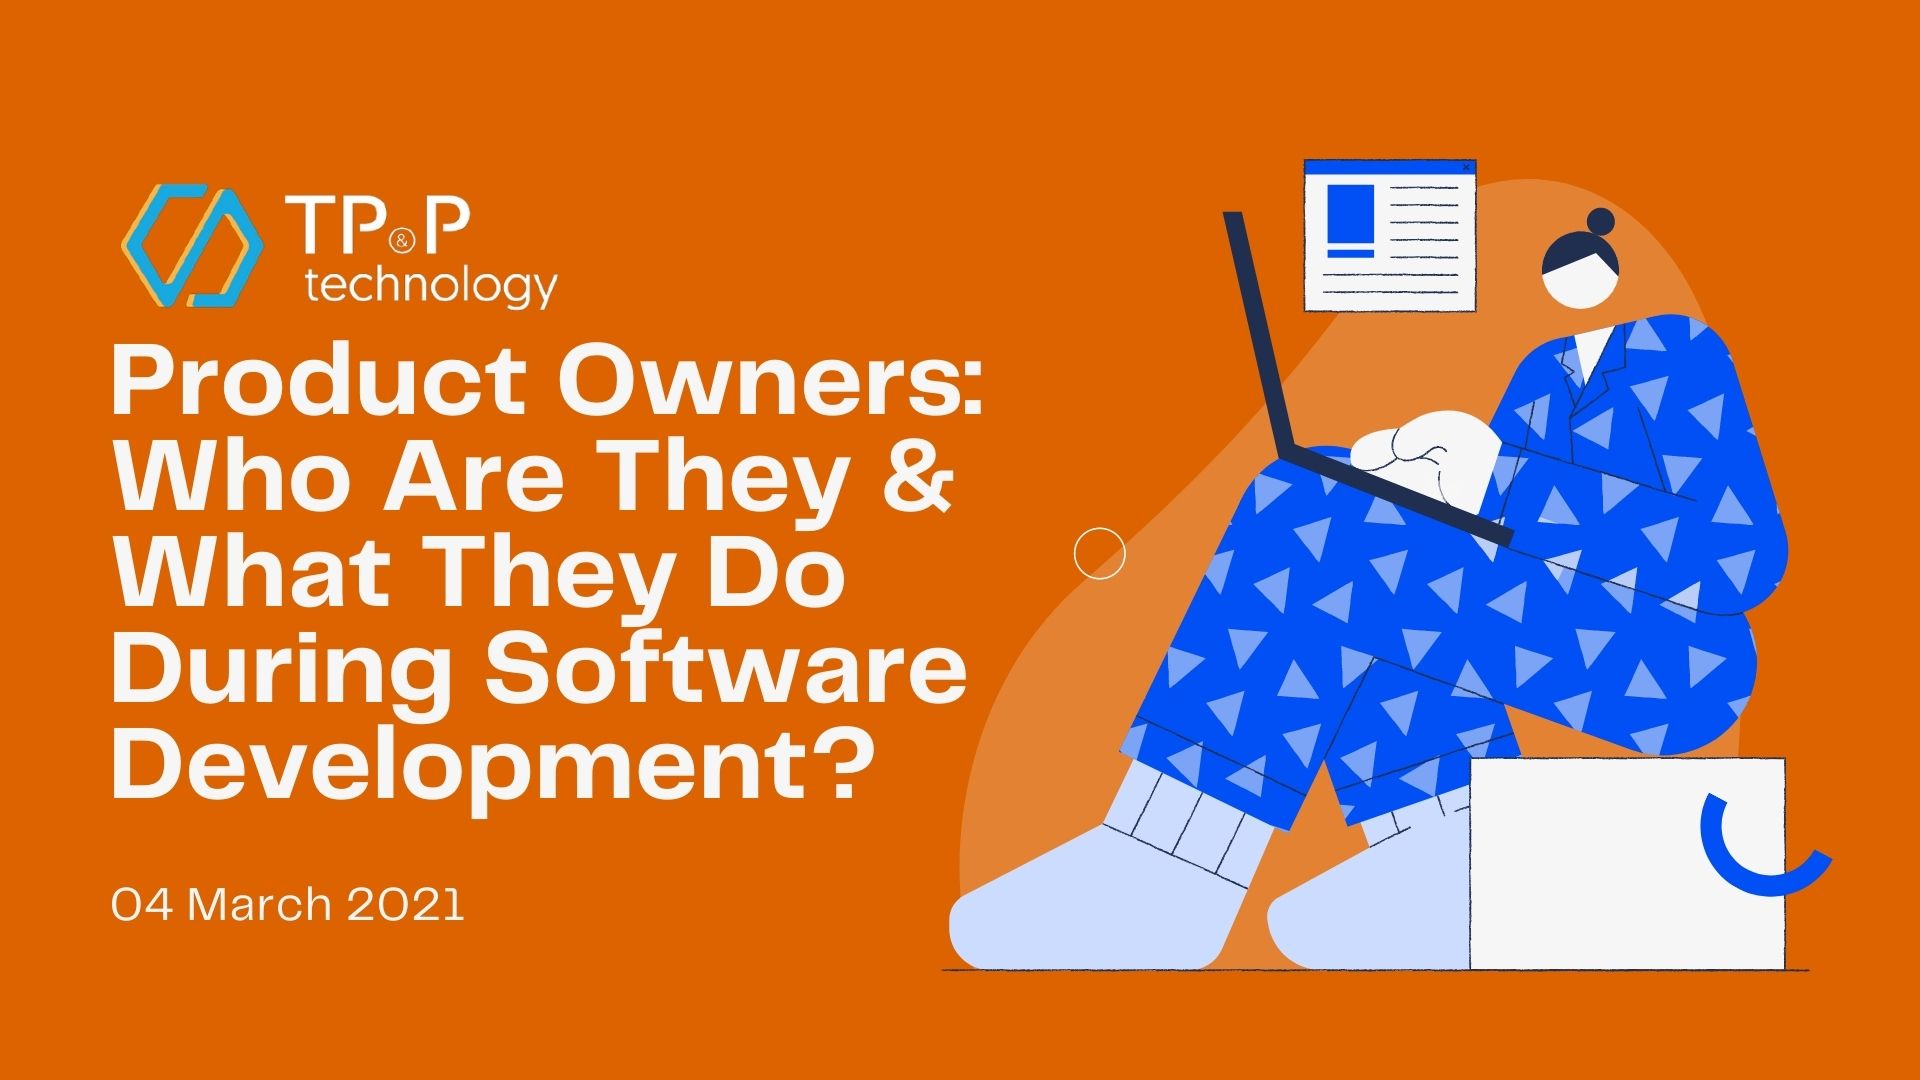 Product Owners: Who Are They & What They Do During Software Development?